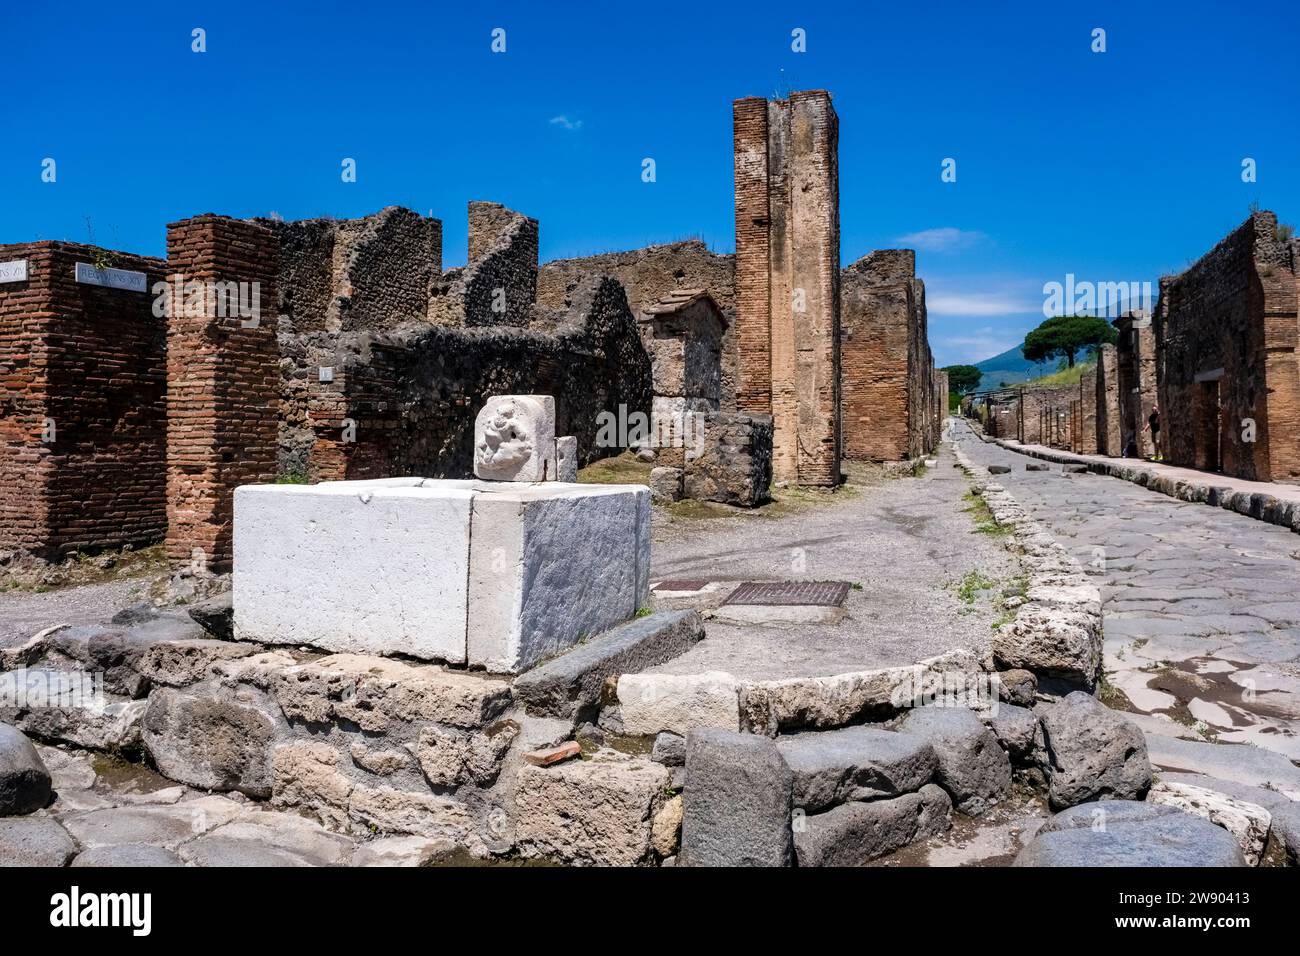 Ruins in Vicolo del Panettiere in the archaeological site of Pompeii, an ancient city destroyed by the eruption of Mount Vesuvius in 79 AD. Stock Photo